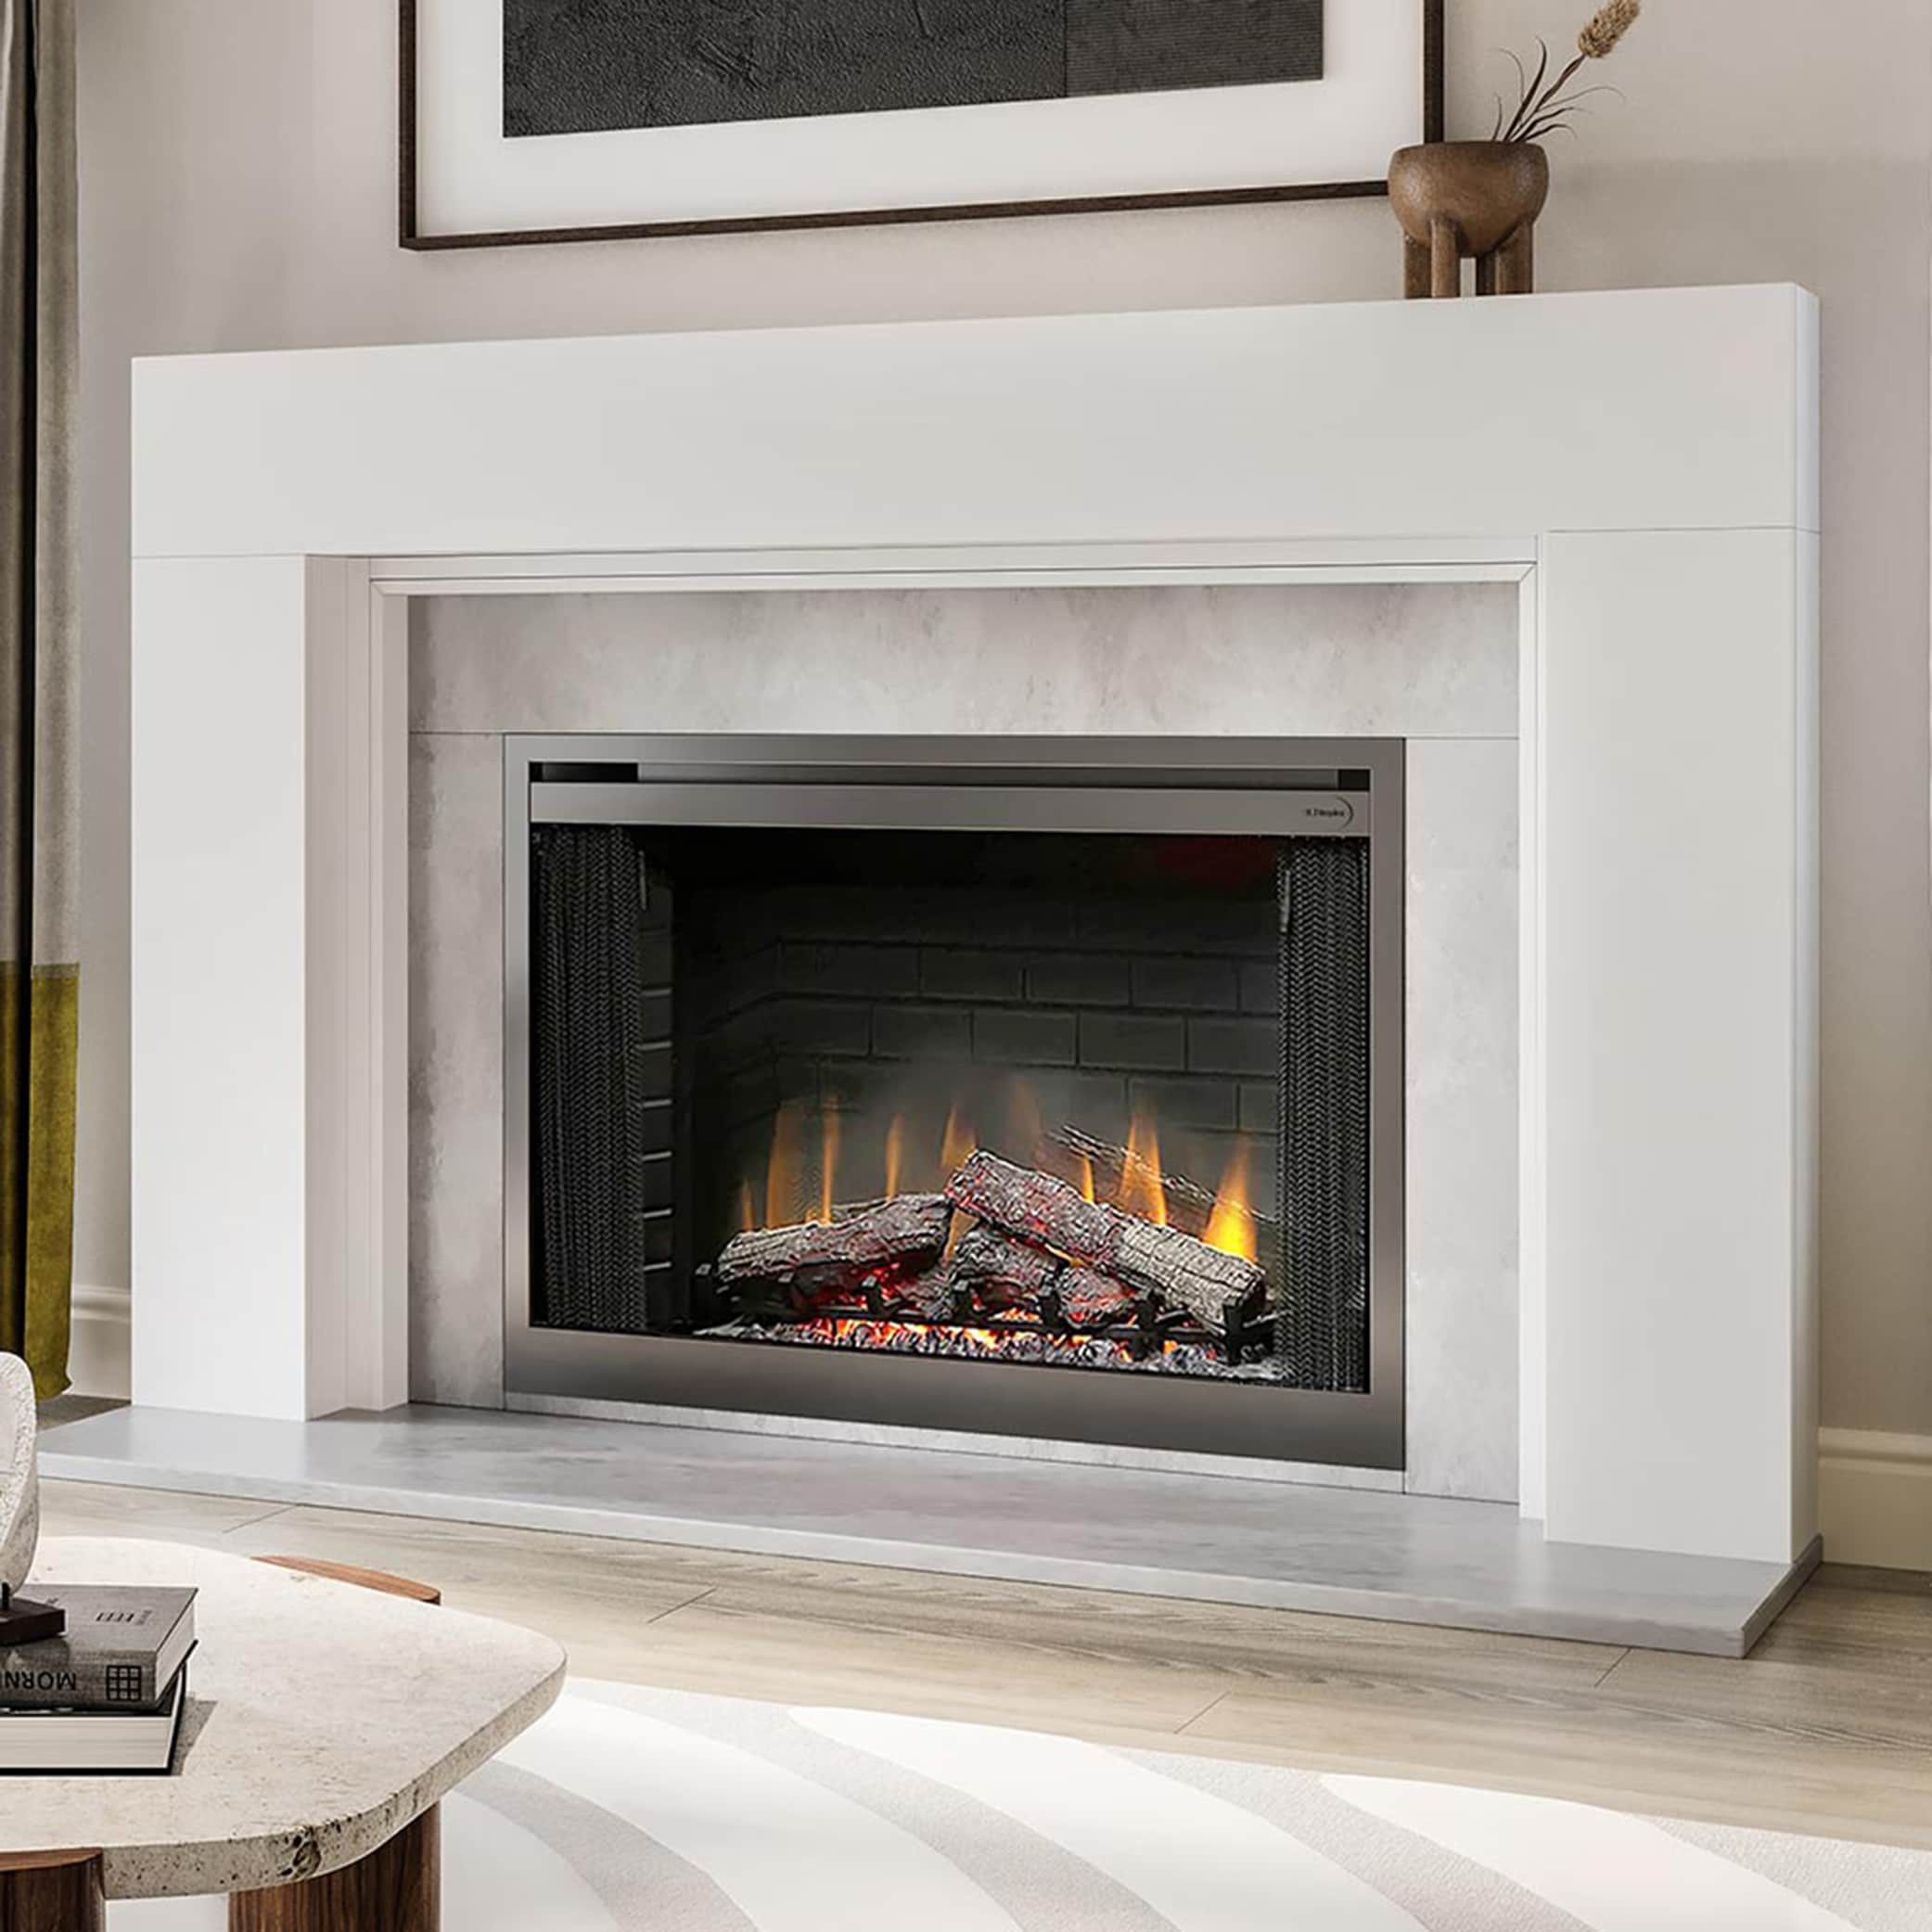 in x Contemporary D 8-in 80-in the 54-in Fireplace H Mantel Fireplace Black Maple Ember x department Modern at W Mantels